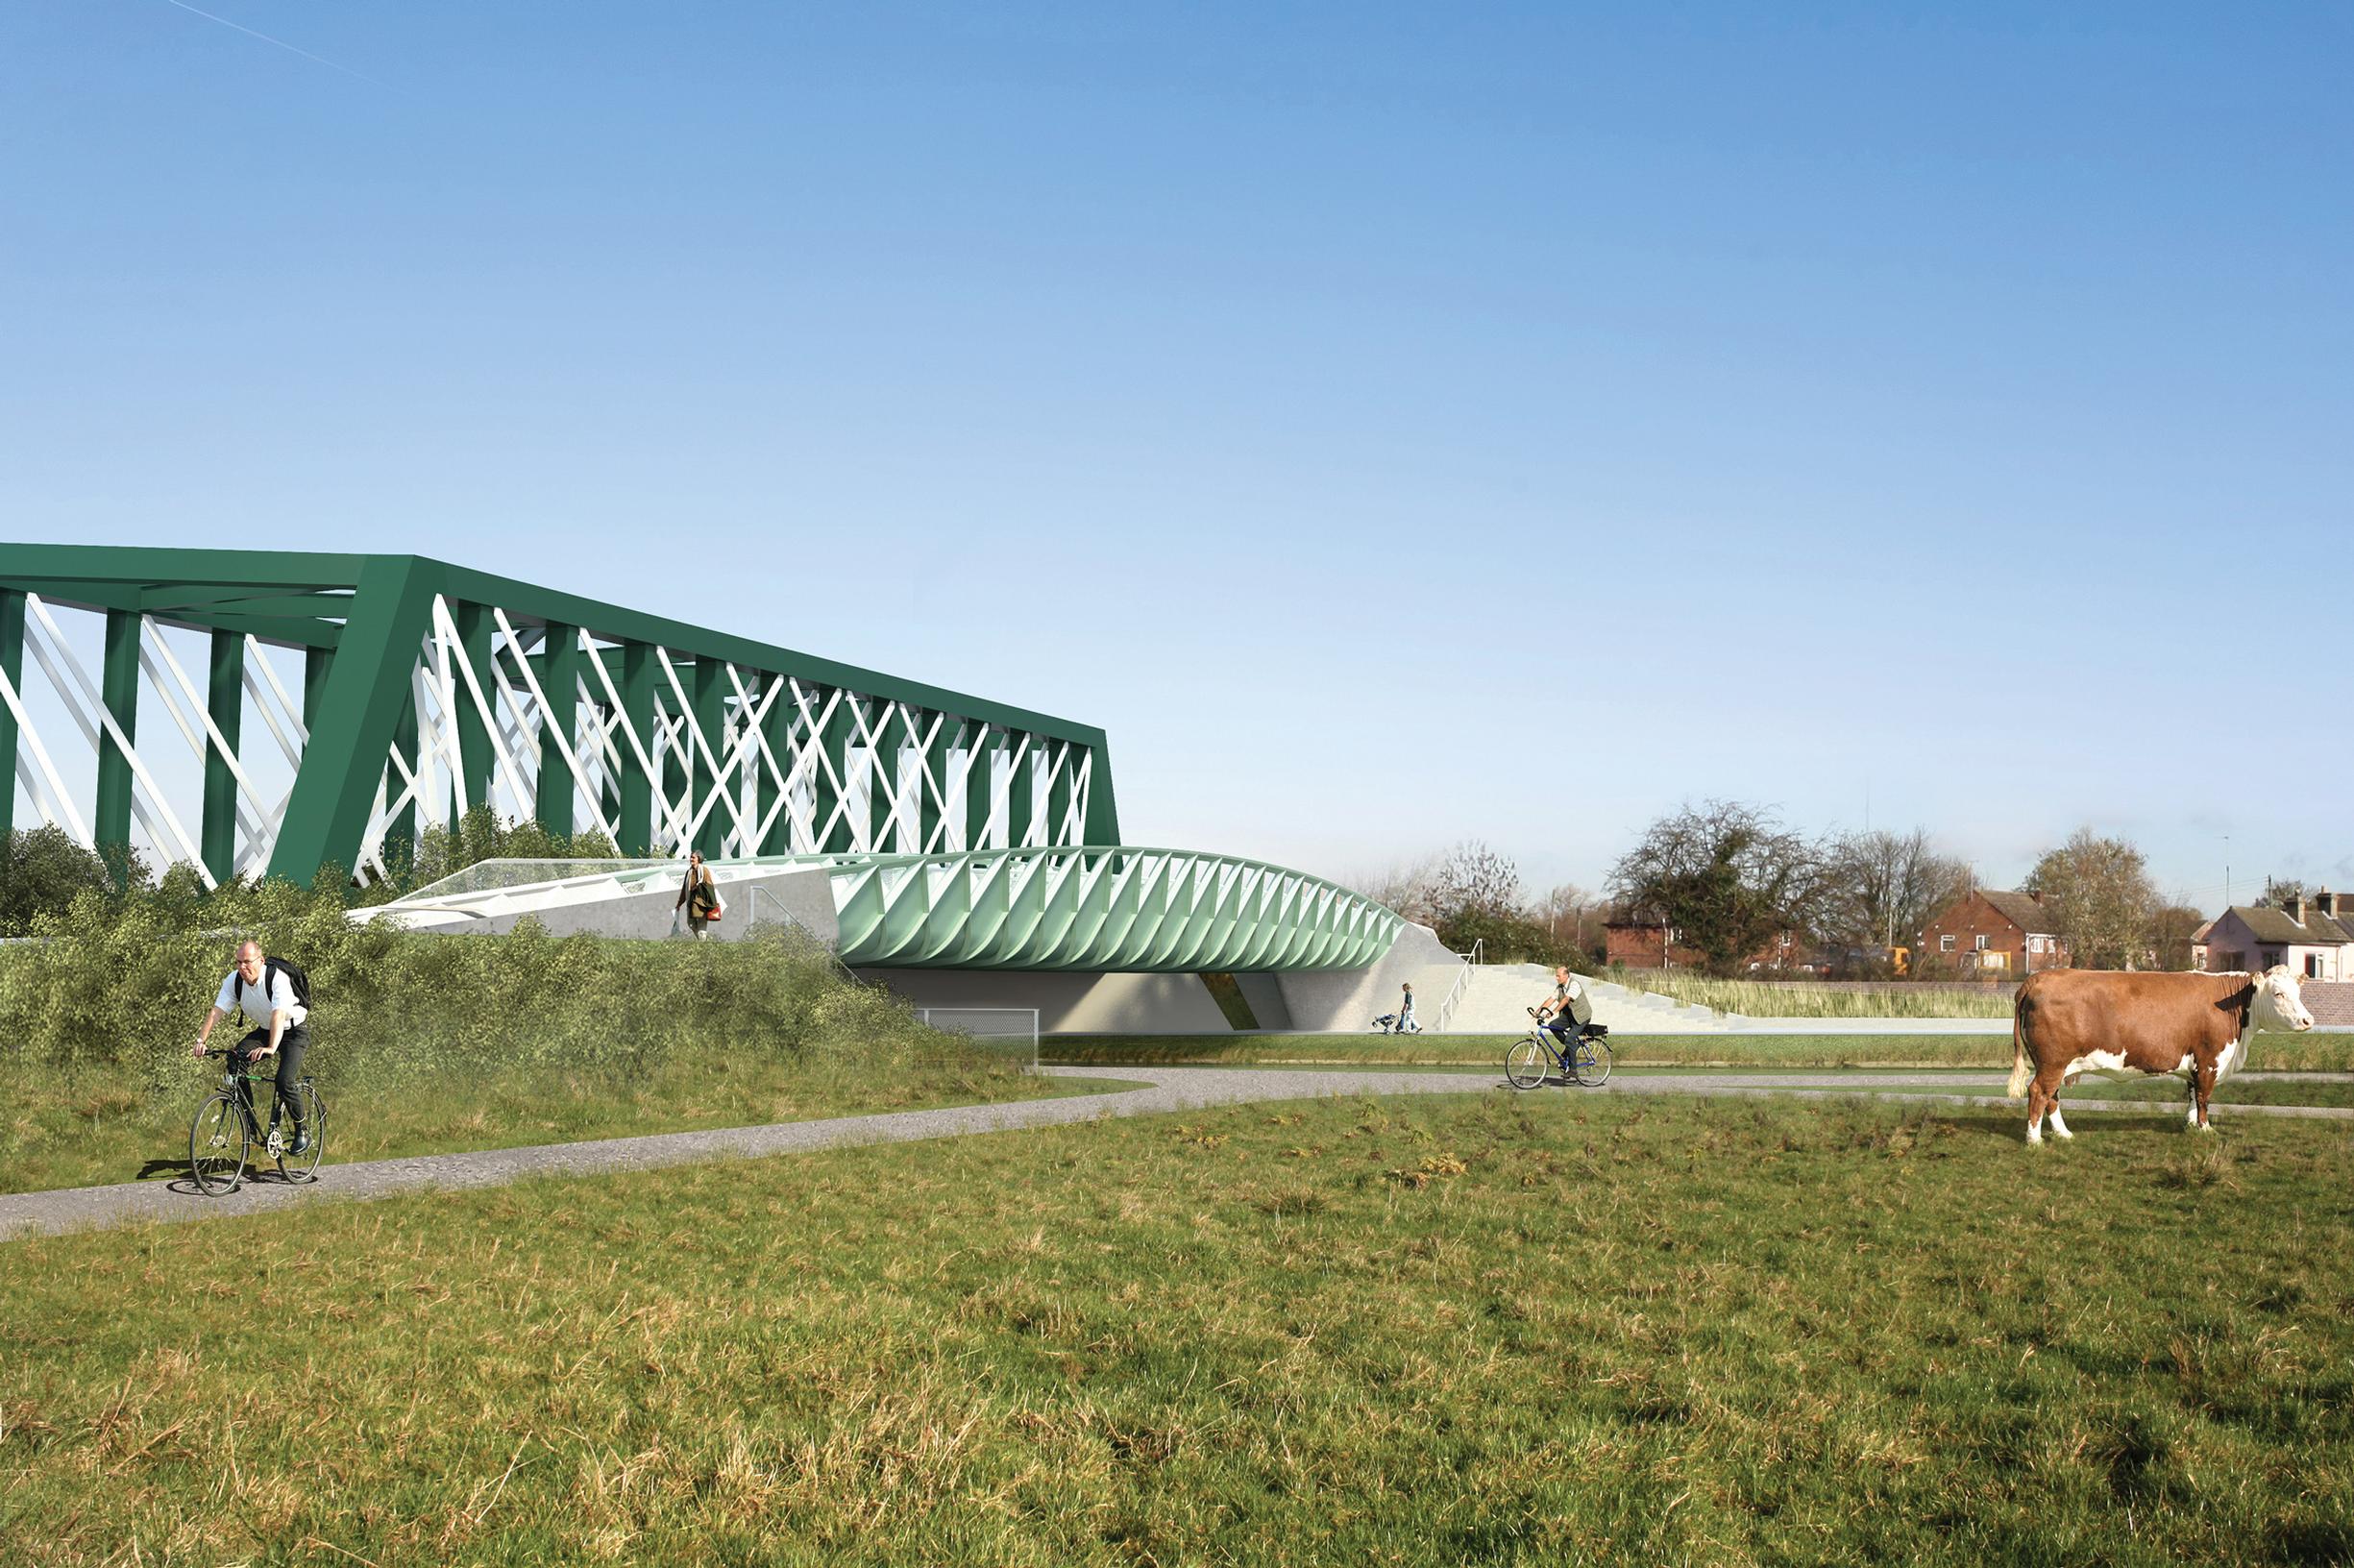 The infrastructure impact tool assesses projects such as new bridges